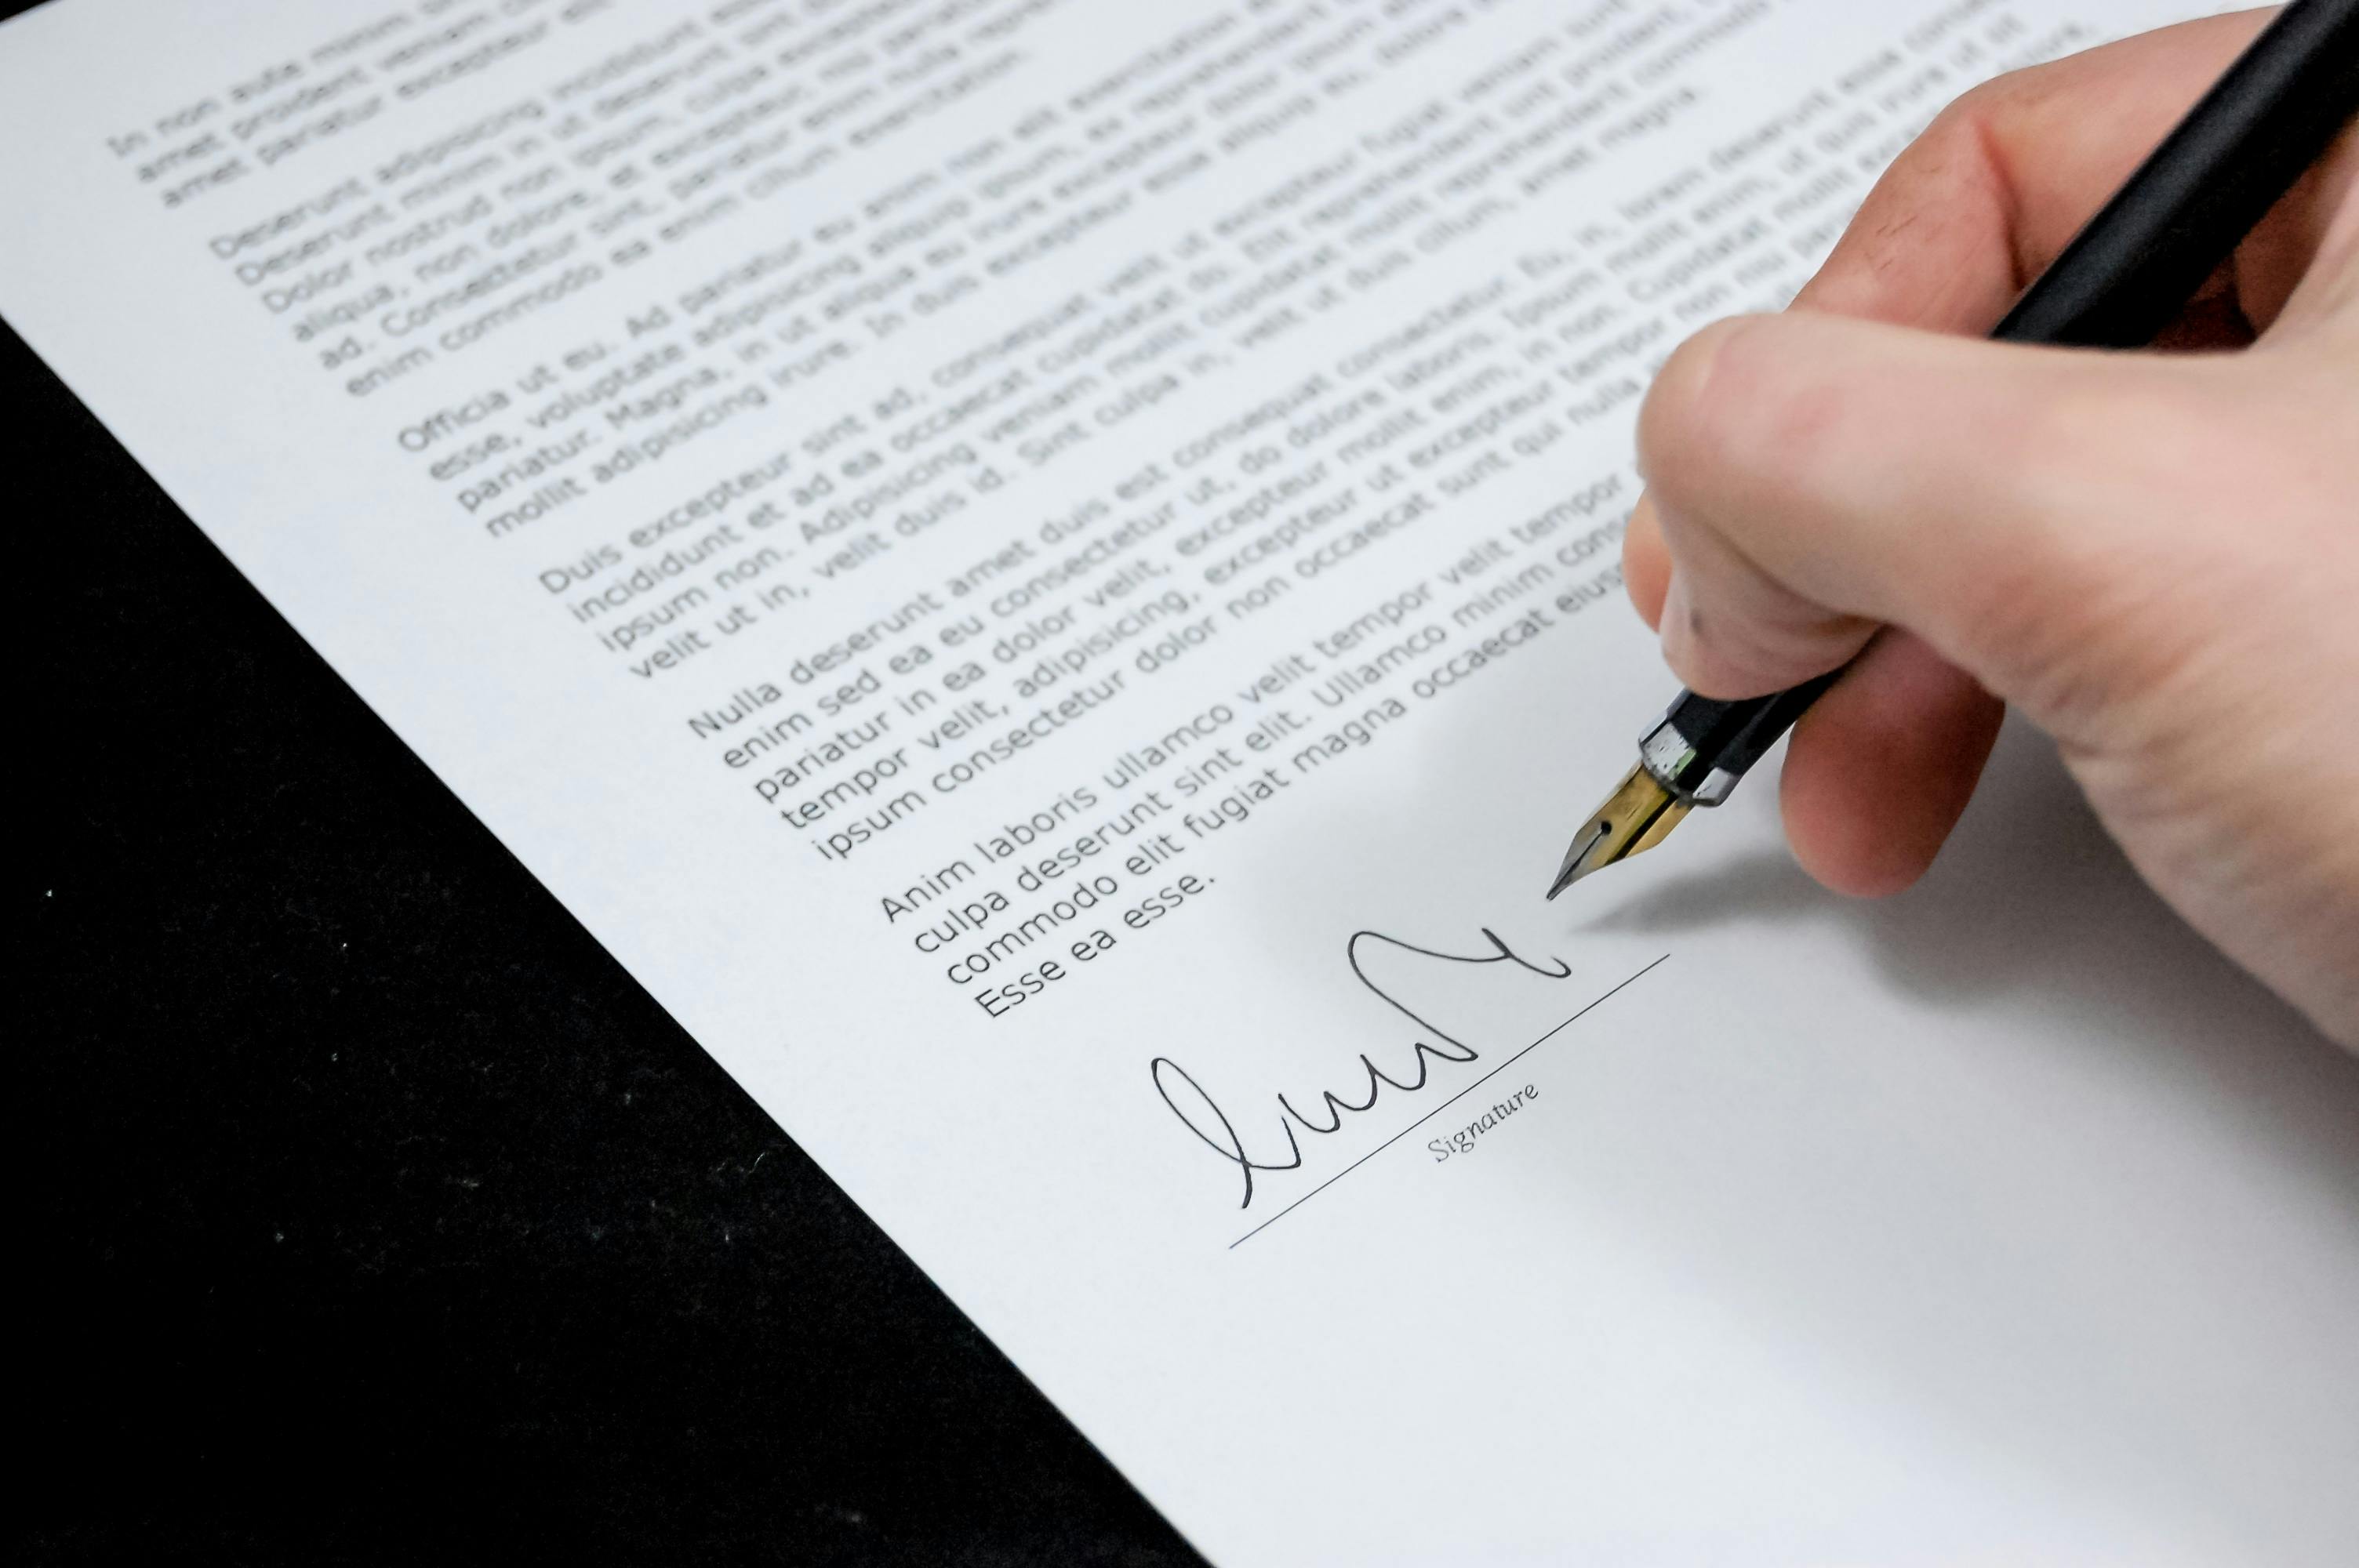 The prenup being signed | Source: Pexels